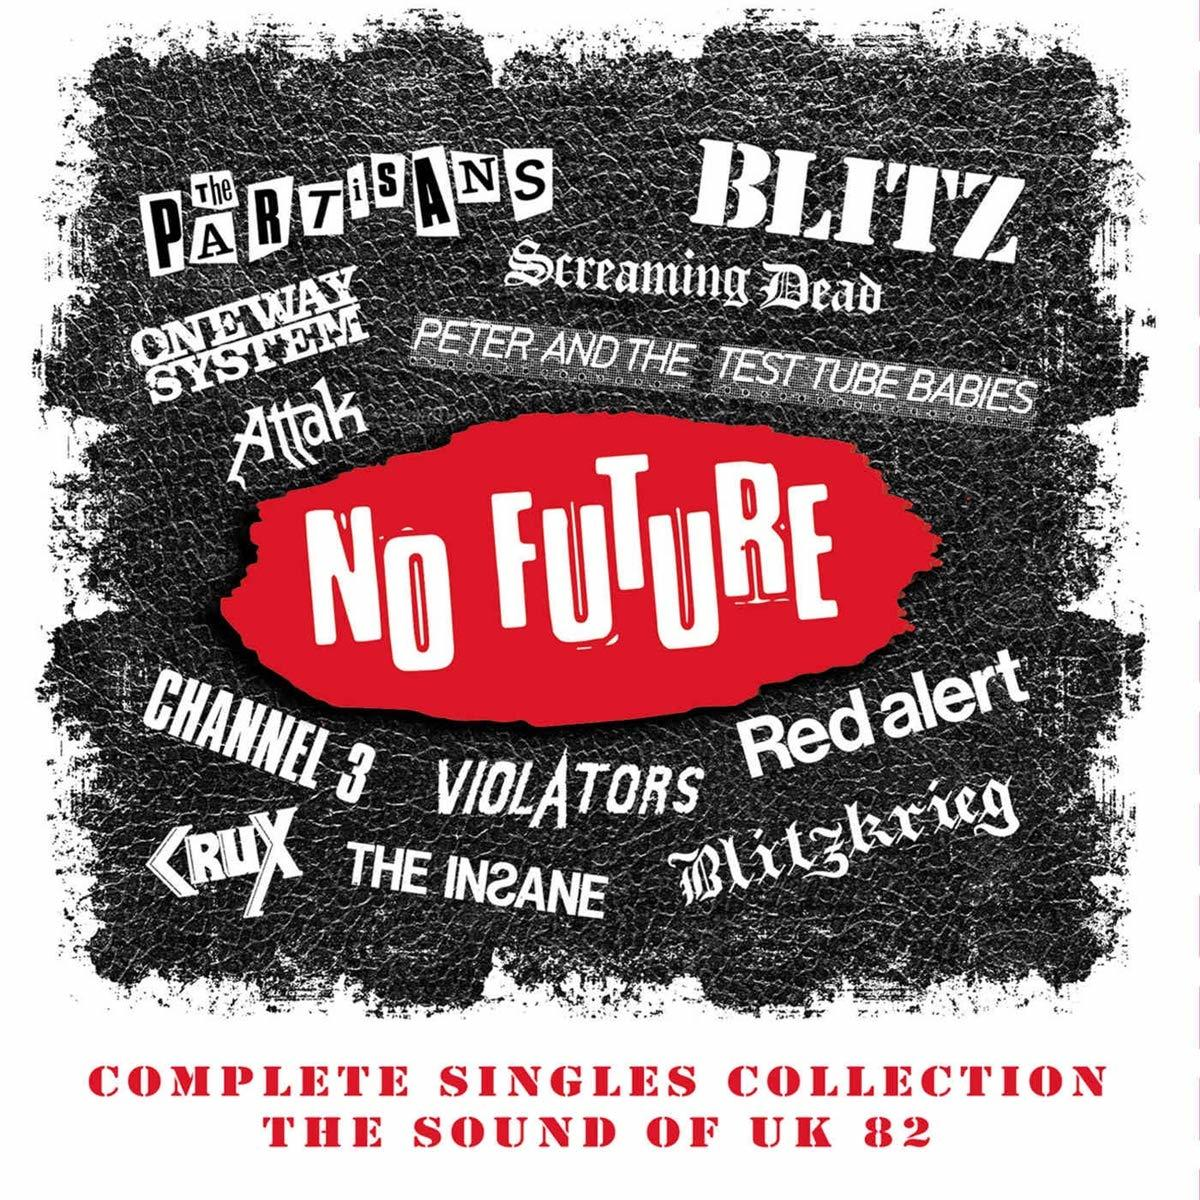 VARIOUS - No Future: Sound Complete Singles Collection-The (CD) 